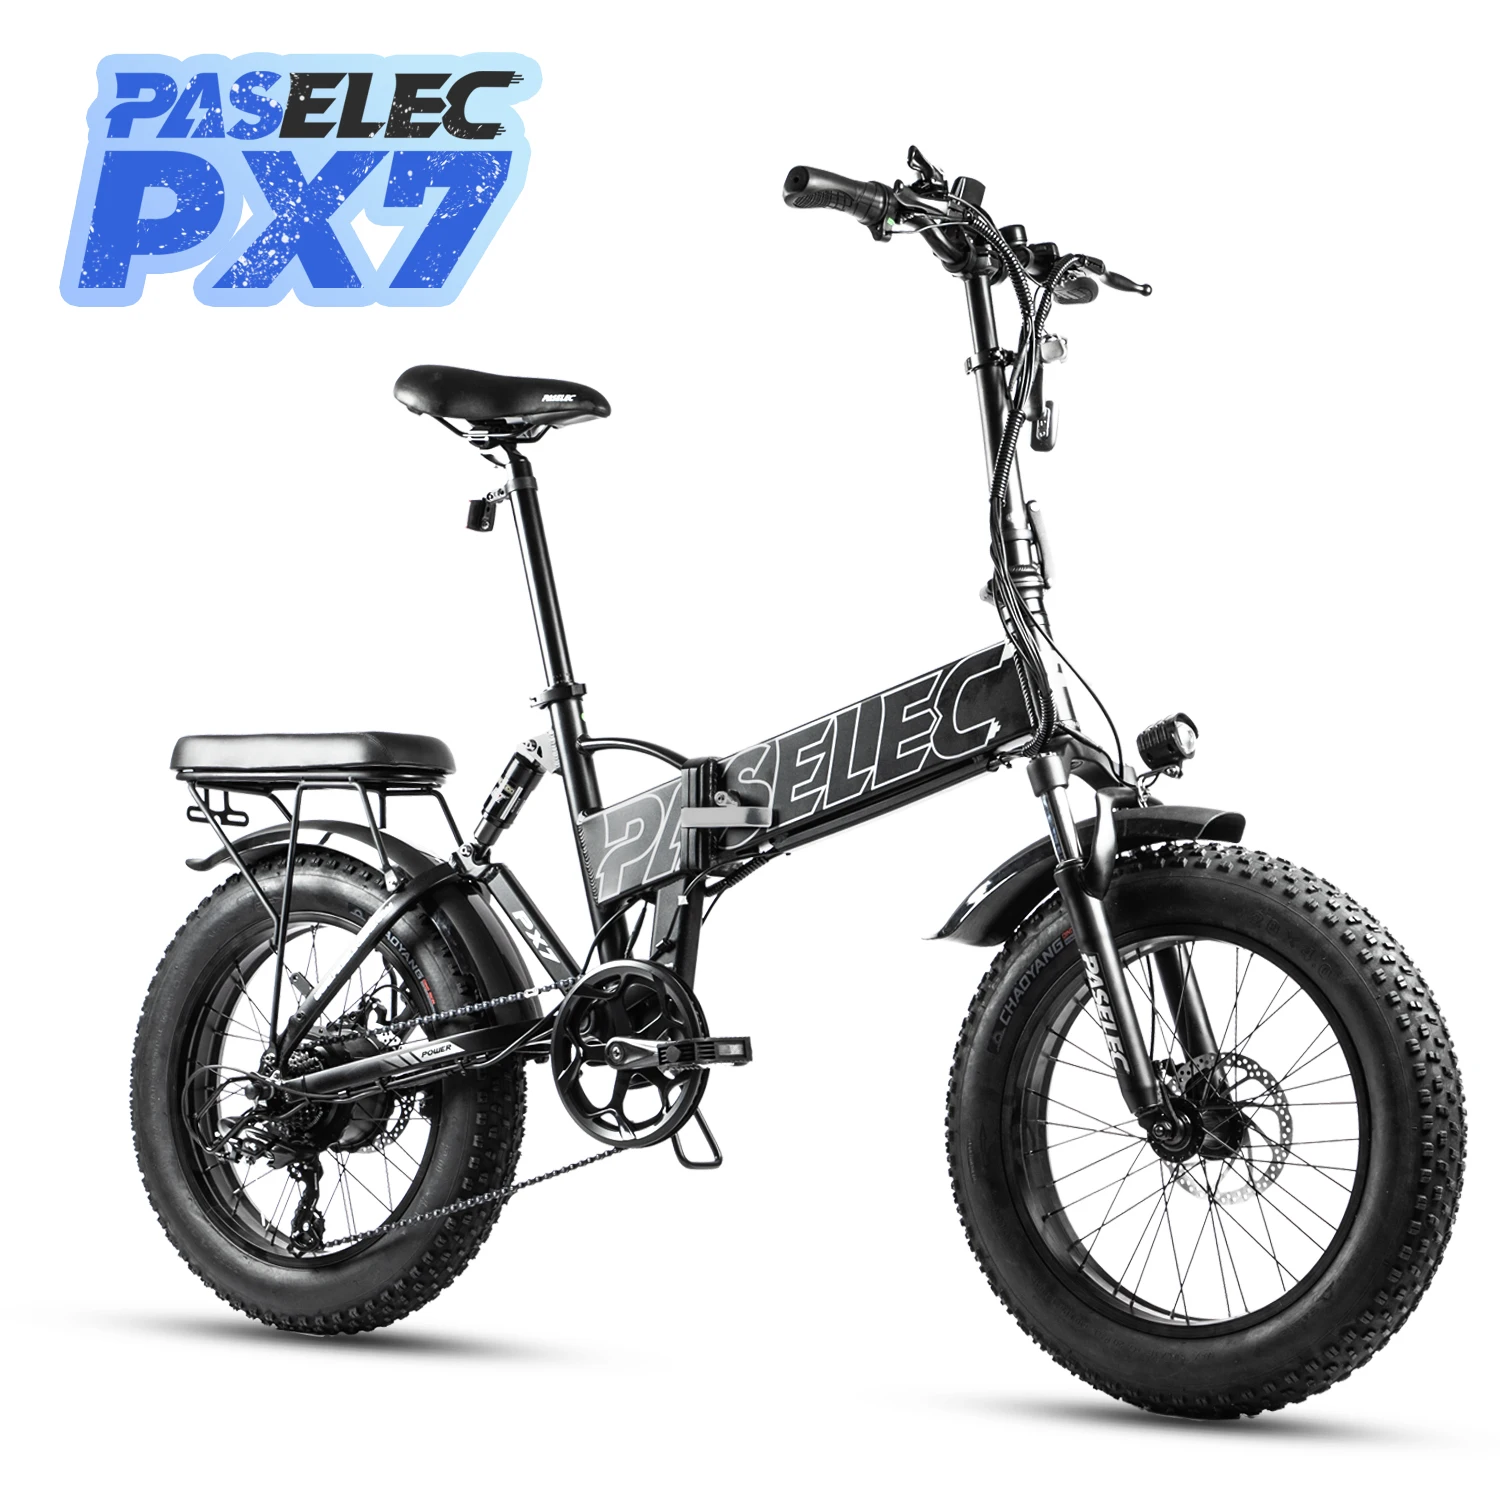 

PASELEC The coolest ebike on Most Affordable Folding Electric Bike Fat Tire Bicycle All Terrain 500w E bike wholesale